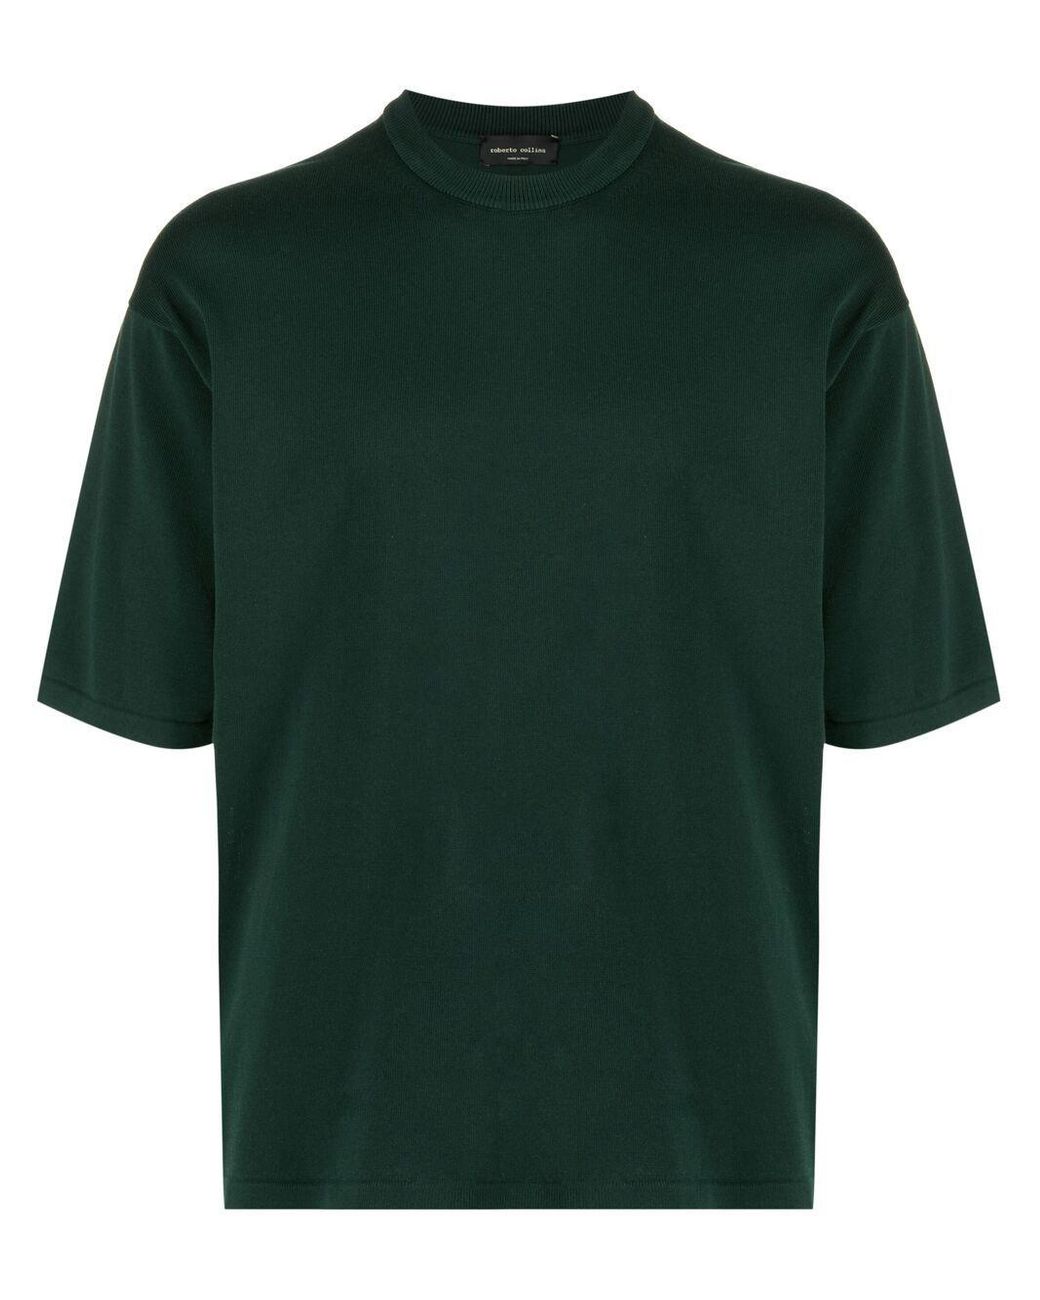 Roberto Collina Short-sleeved Cotton T-shirt in Green for Men - Lyst